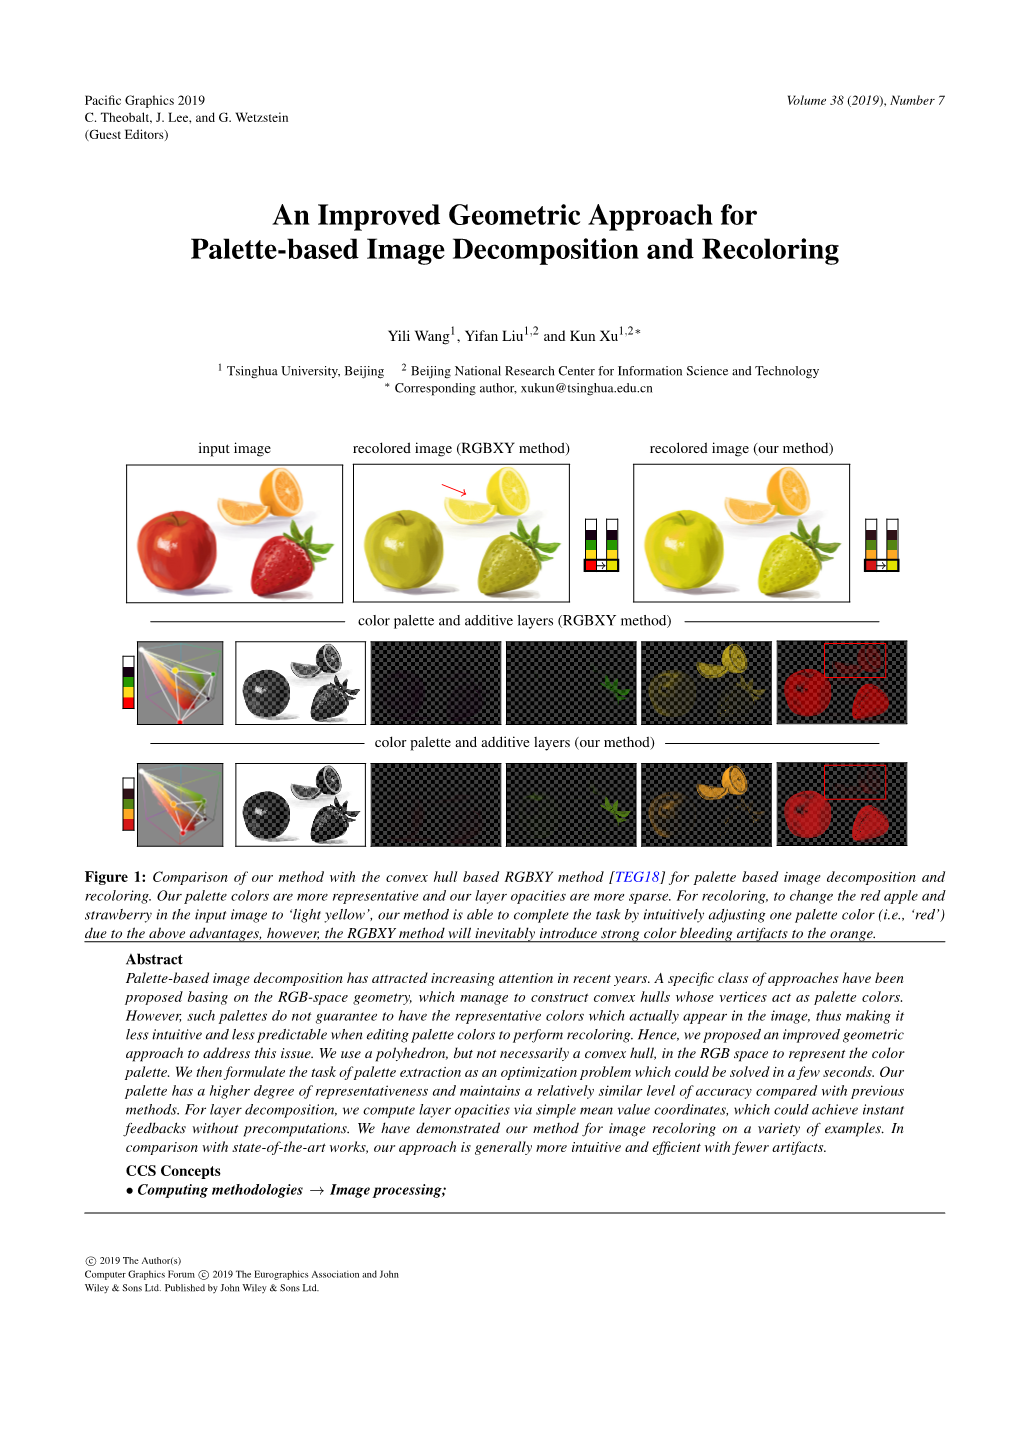 An Improved Geometric Approach for Palette-Based Image Decomposition and Recoloring